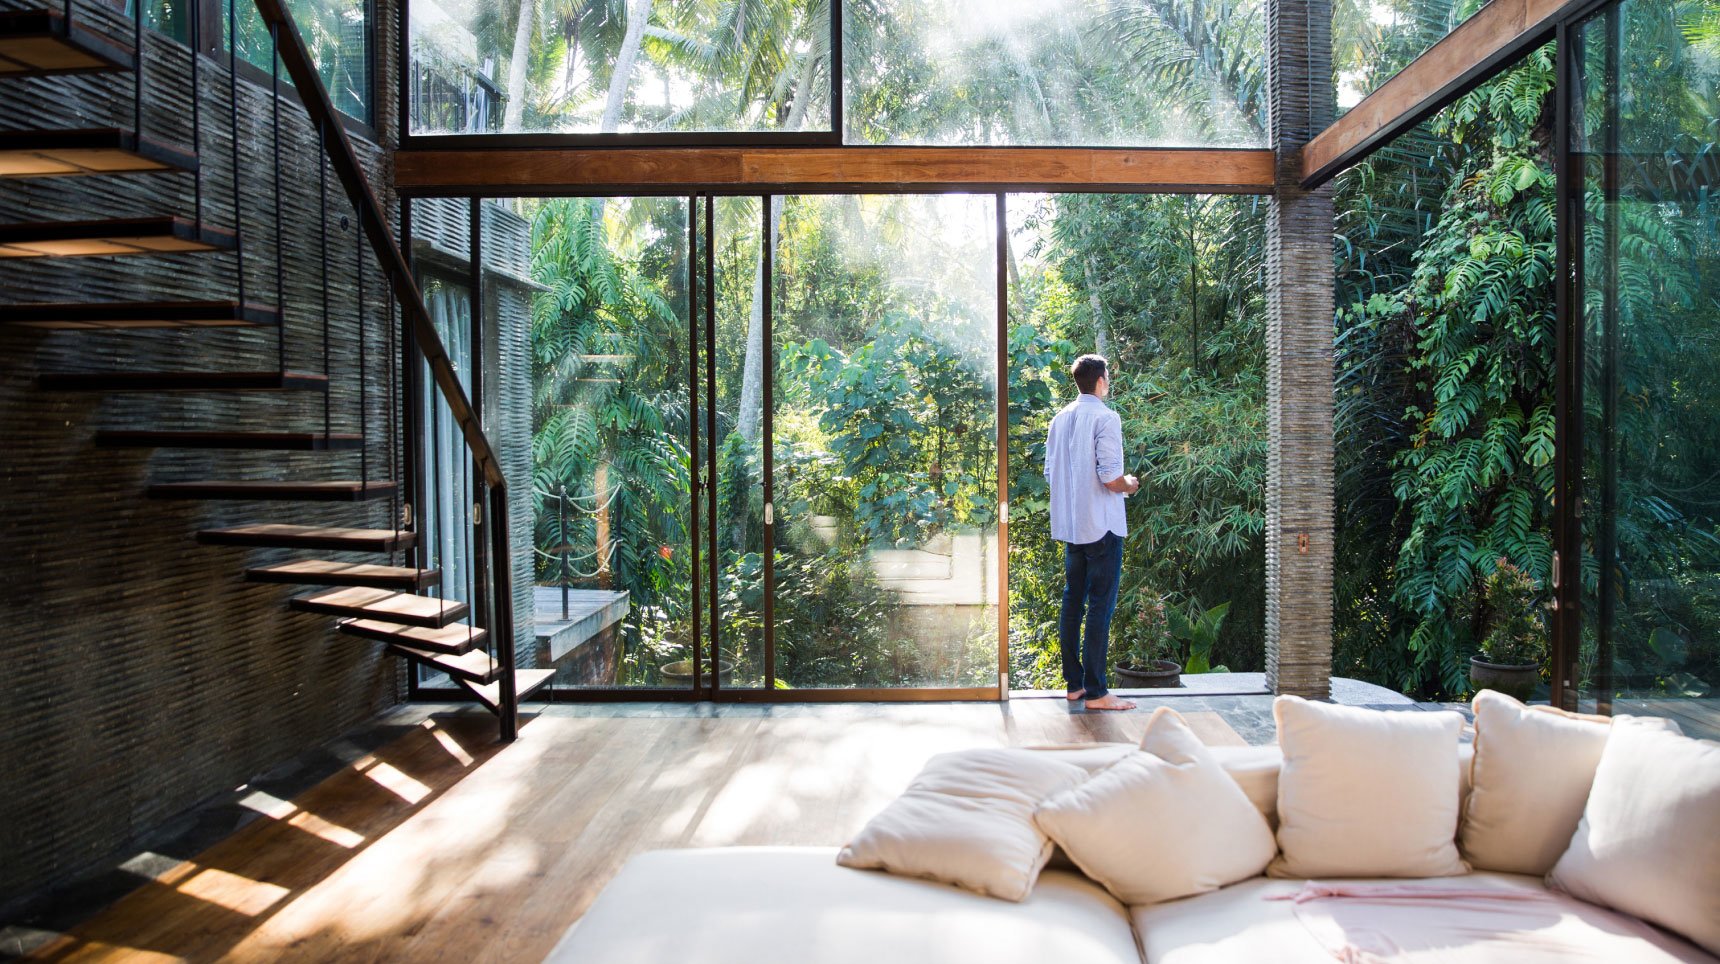 Man Stepping Outside of a Modern Floor to Ceiling Glass Home Looking at Lush Greenery